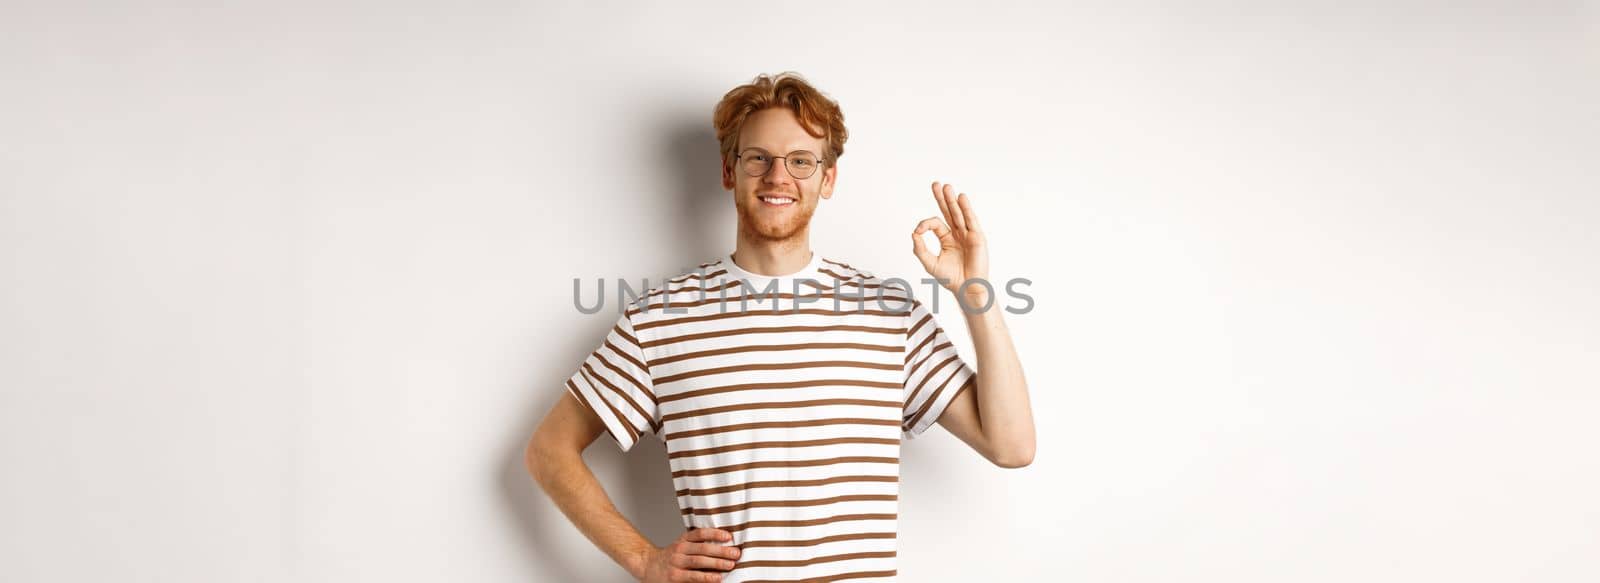 Confident smiling man with red hair assuring you, showing OK sign, guarantee quality, recommending something good, standing over white background.